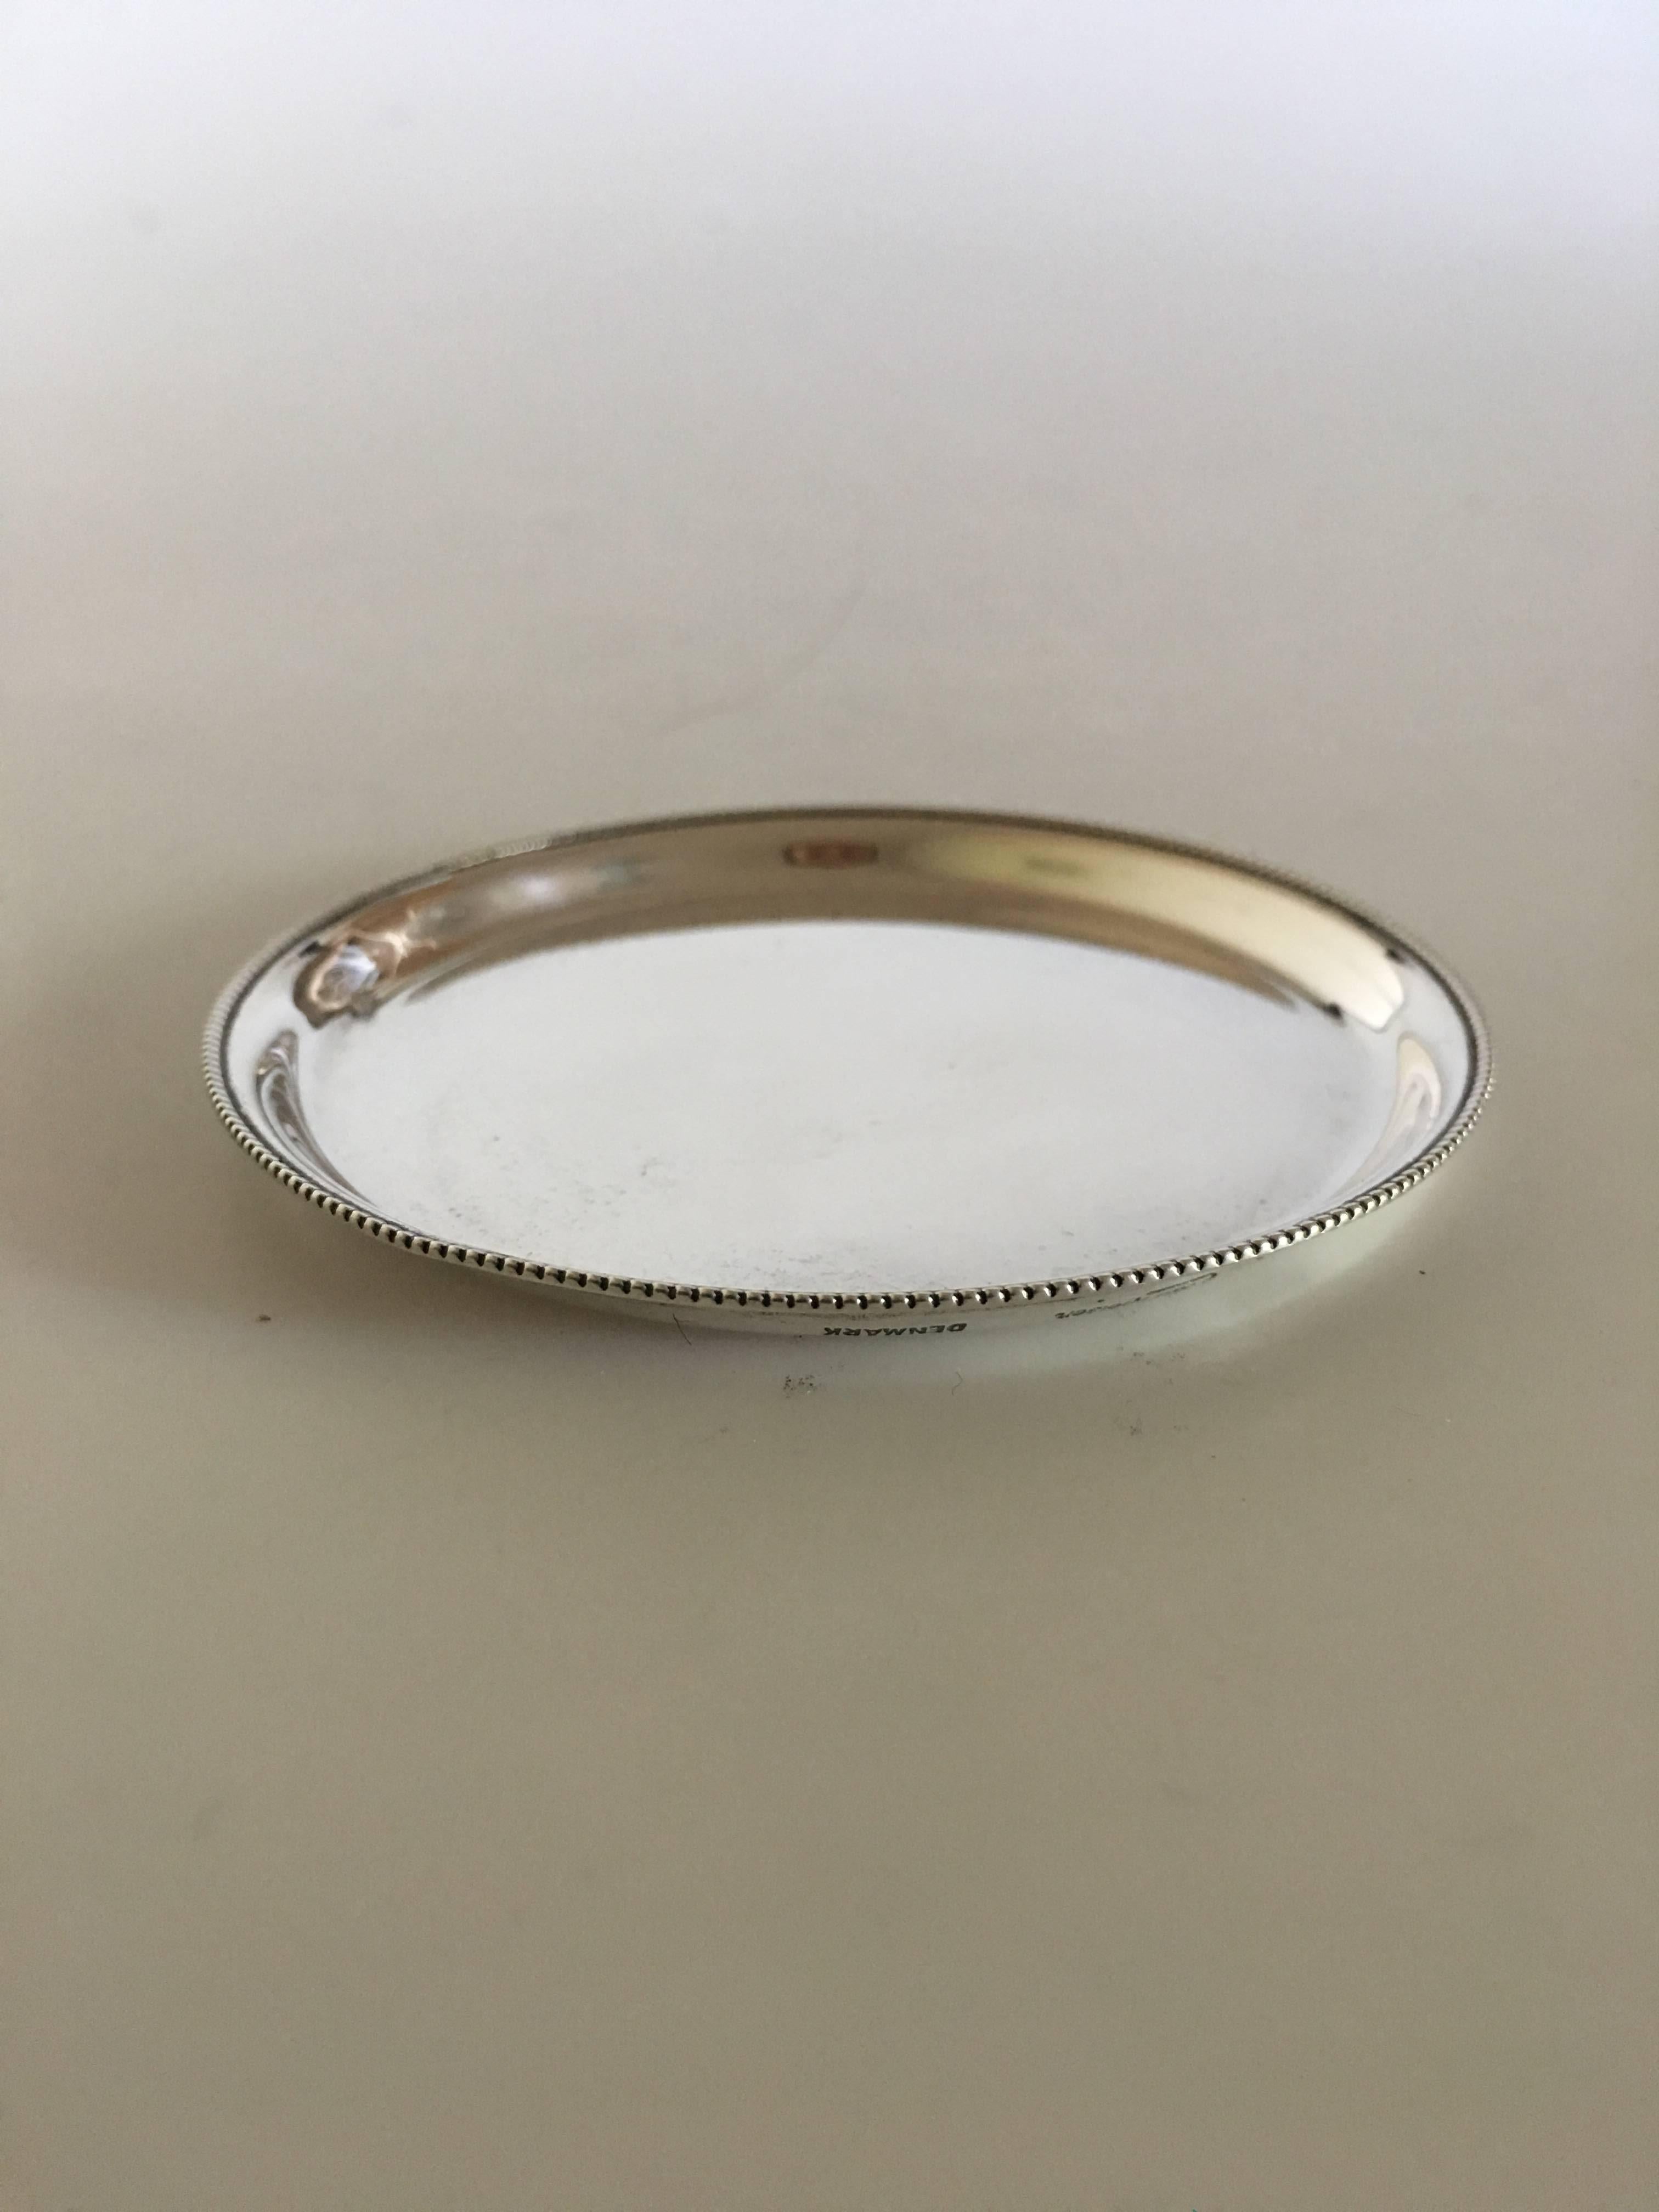 Evald Nielsen sterling silver glass coaster. Fits a glass with maximum 6.5 cm diameter footing. Weighs 30 grams.